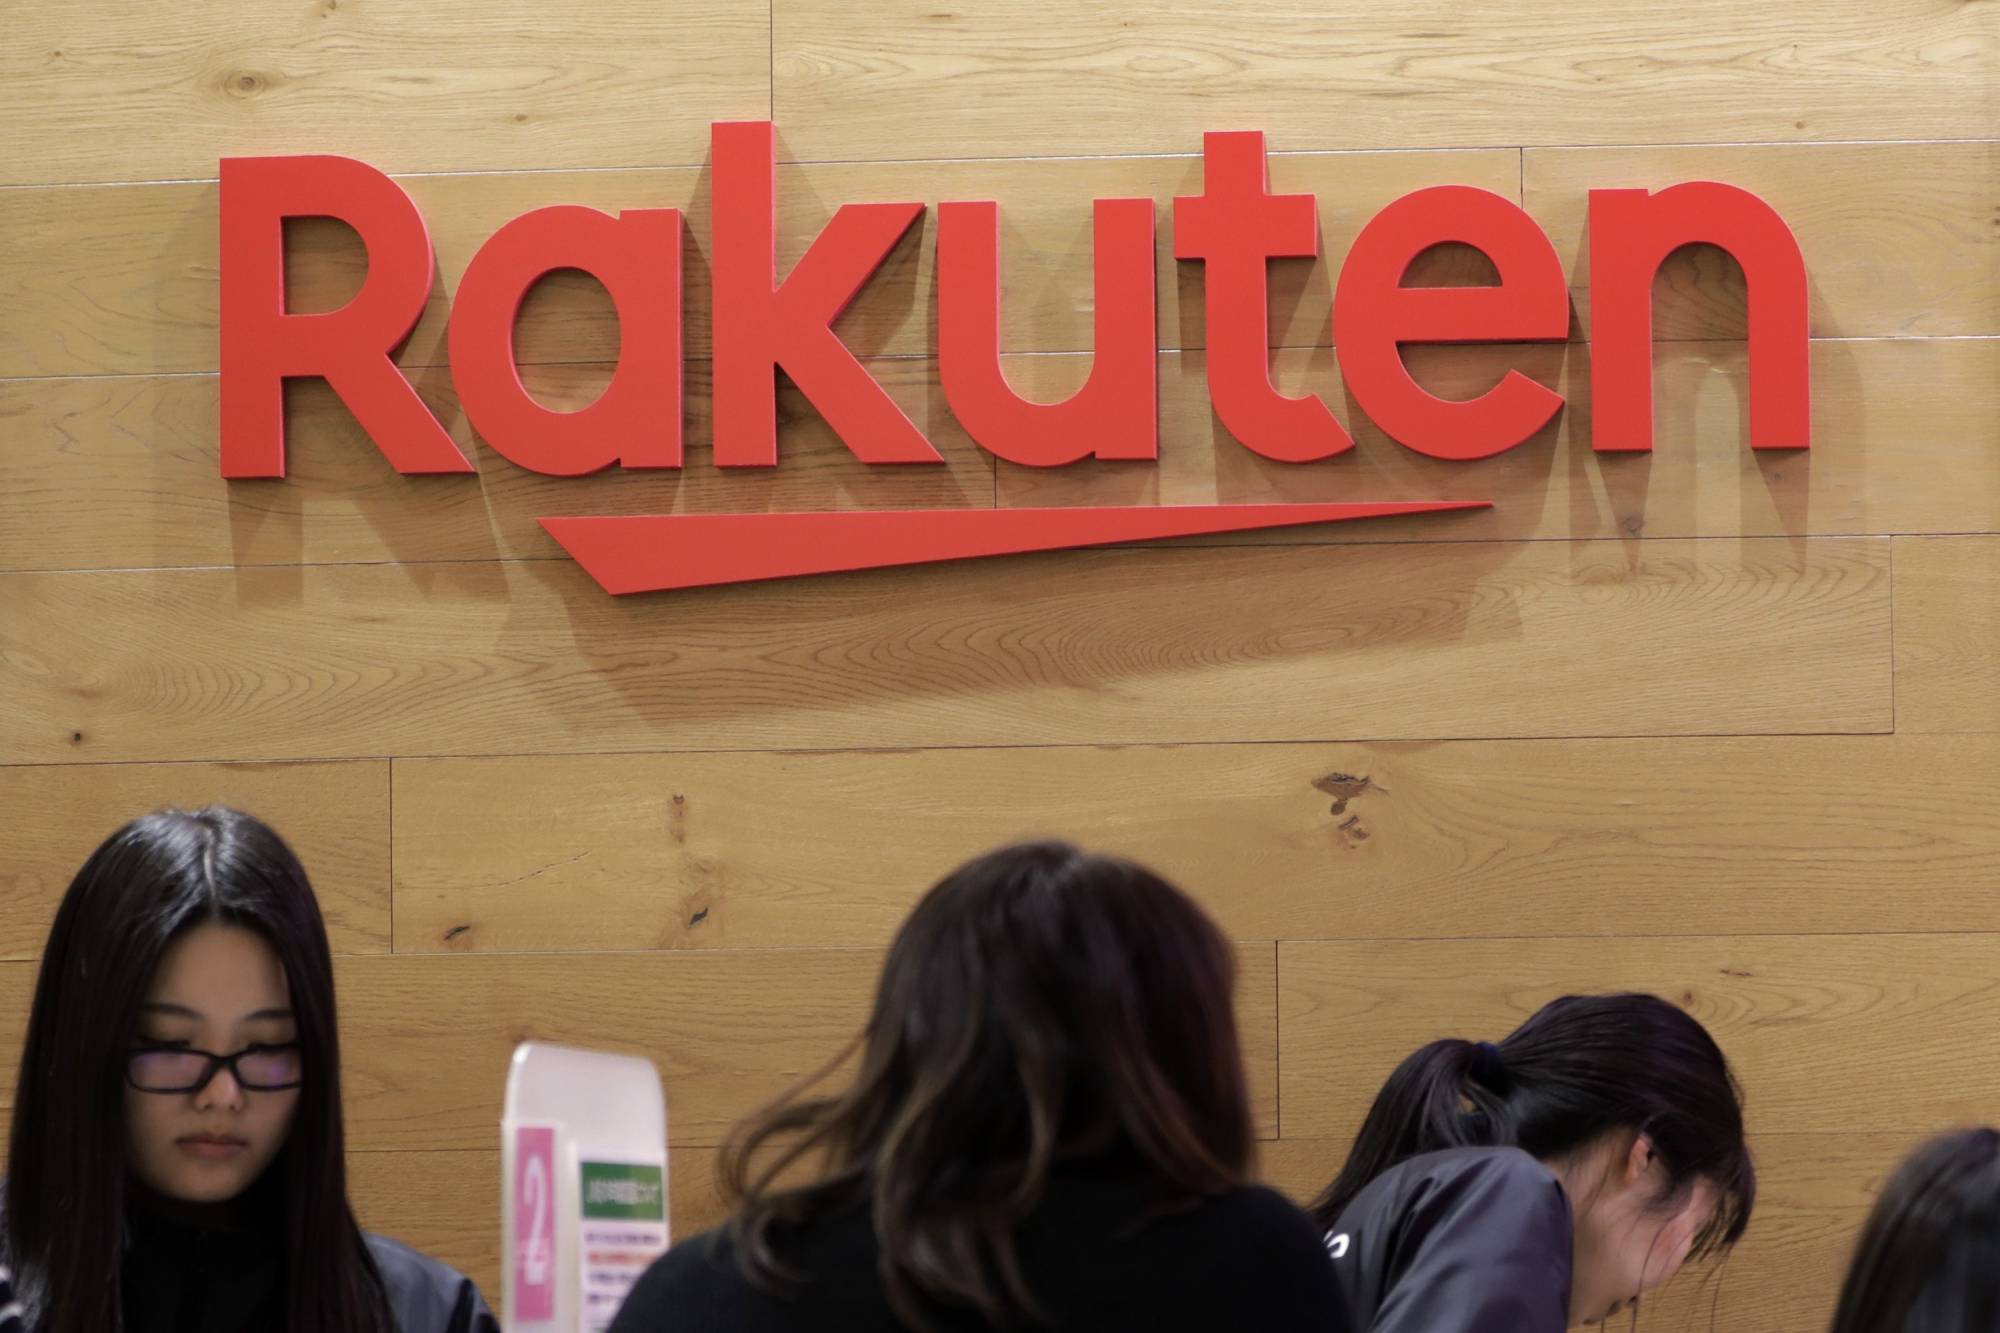 A group company of Chinese tech giant Tencent Holdings Ltd. has become Rakuten Group Inc.'s major shareholder, apparently raising alarm among Japanese and U.S. authorities for national security reasons. | BLOOMBERG